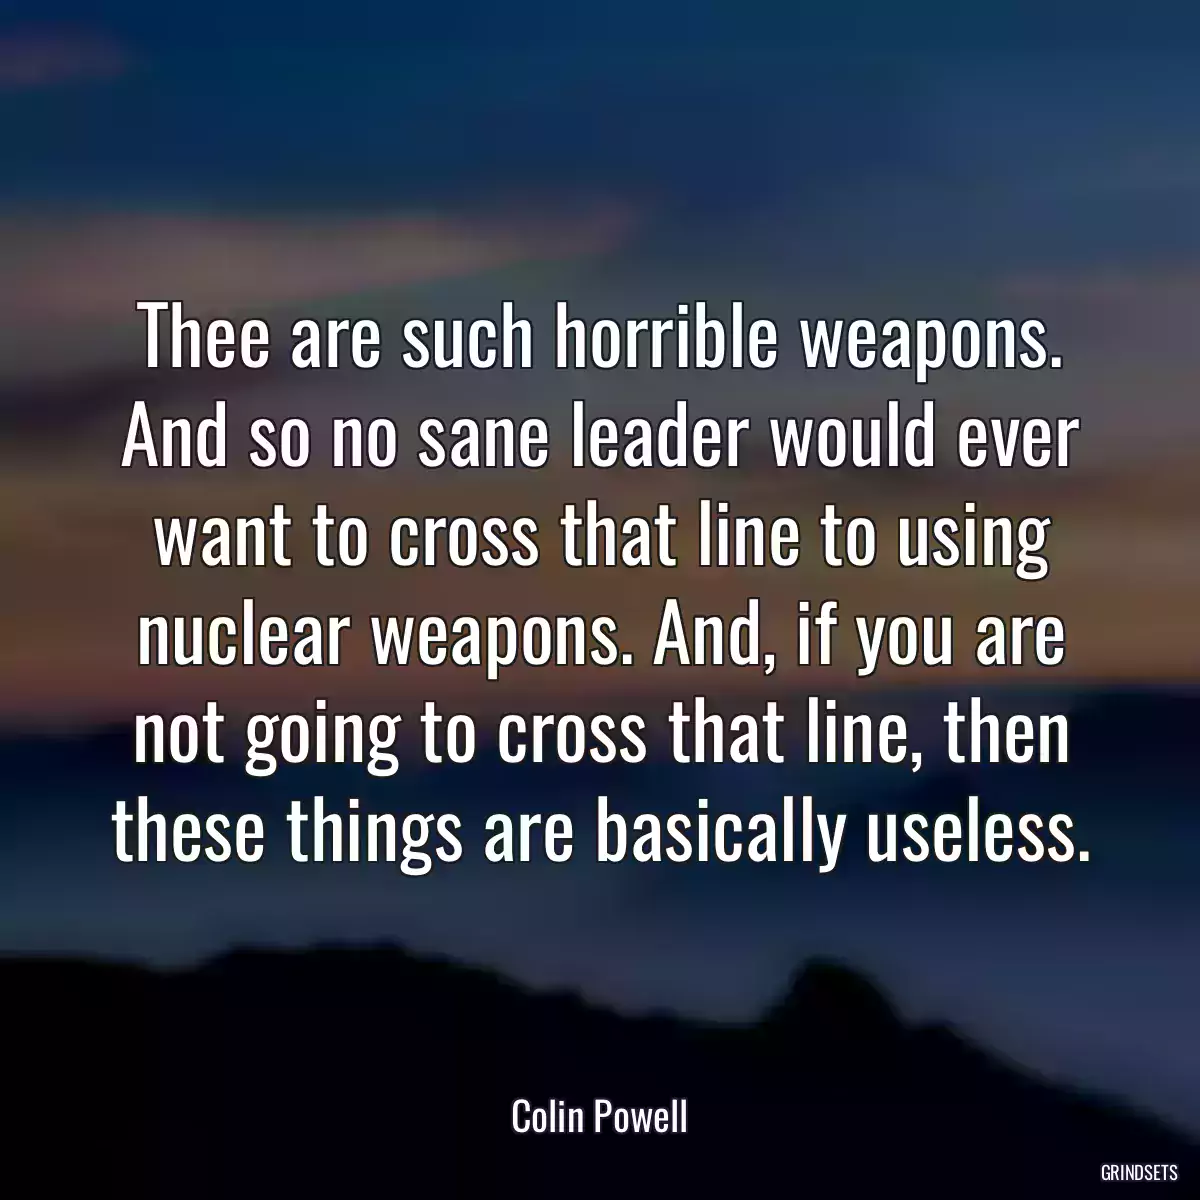 Thee are such horrible weapons. And so no sane leader would ever want to cross that line to using nuclear weapons. And, if you are not going to cross that line, then these things are basically useless.